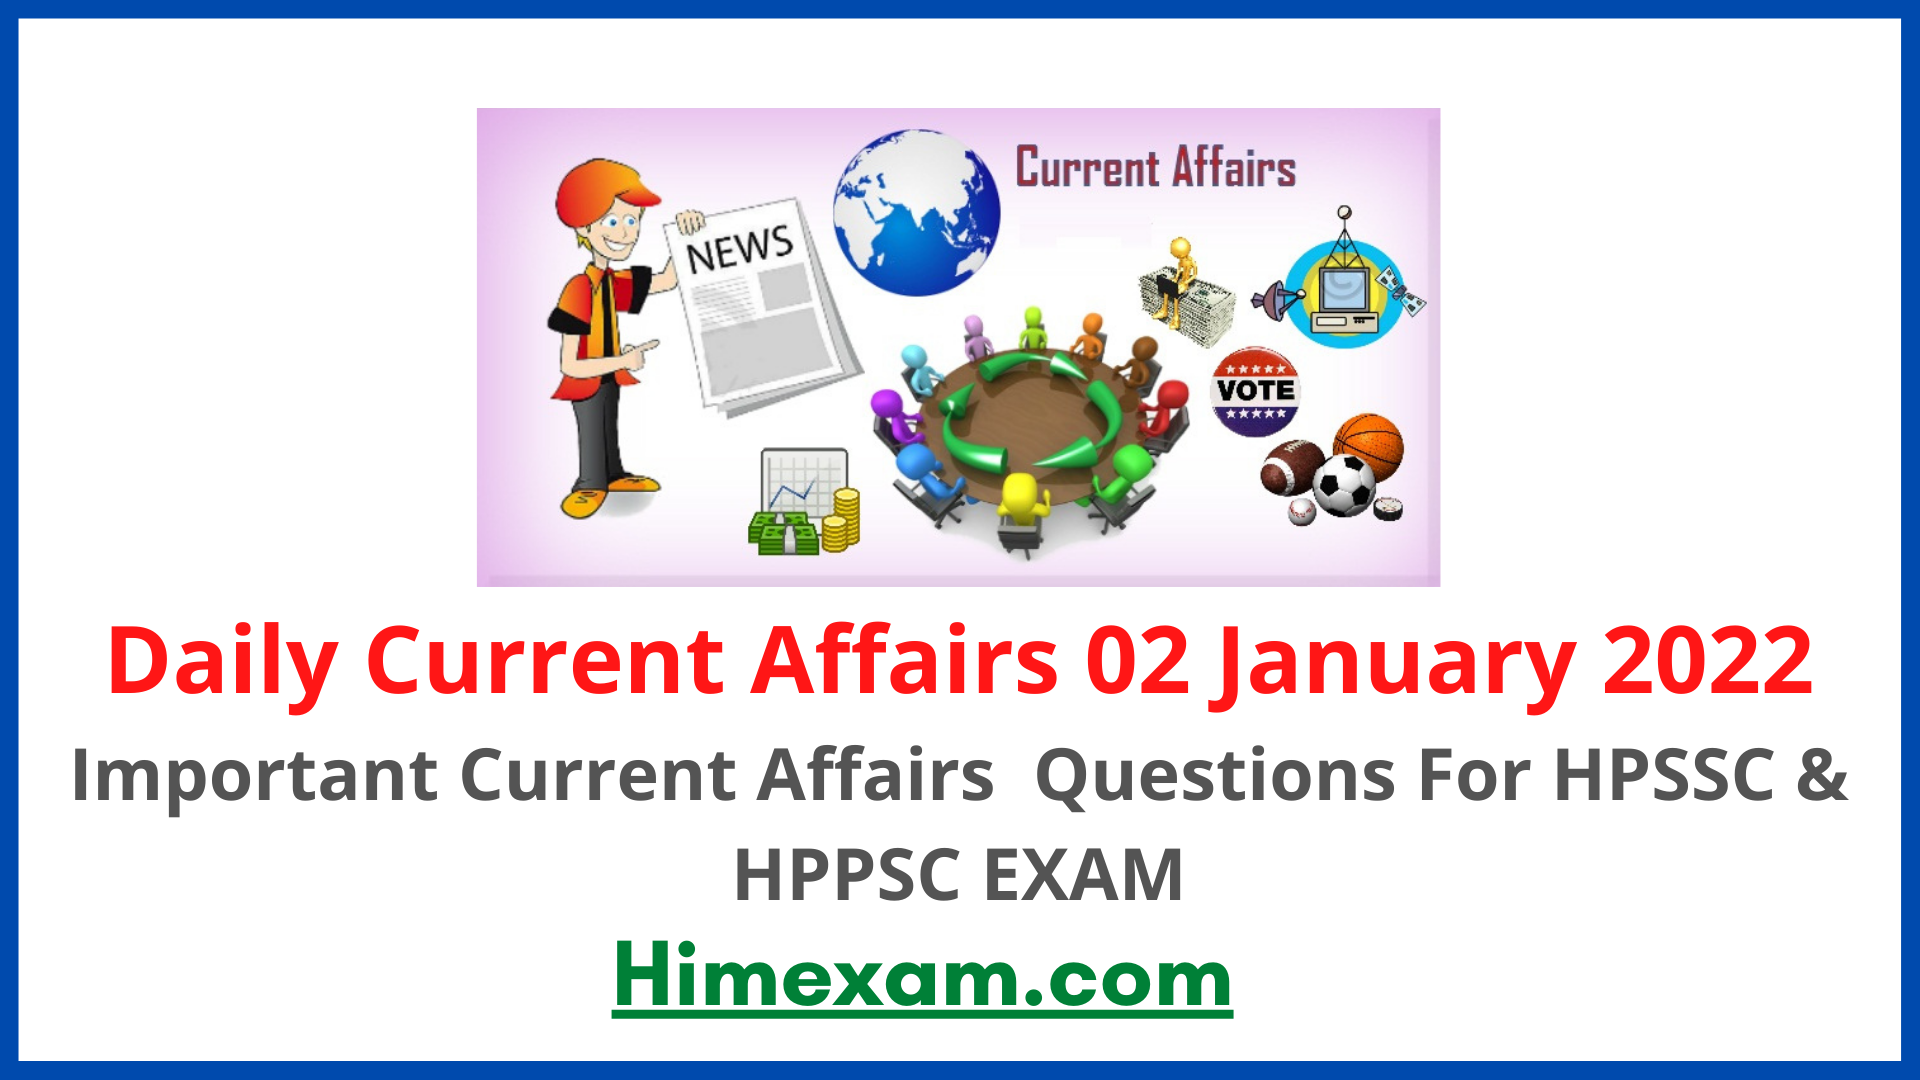 Daily Current Affairs 02 January 2022